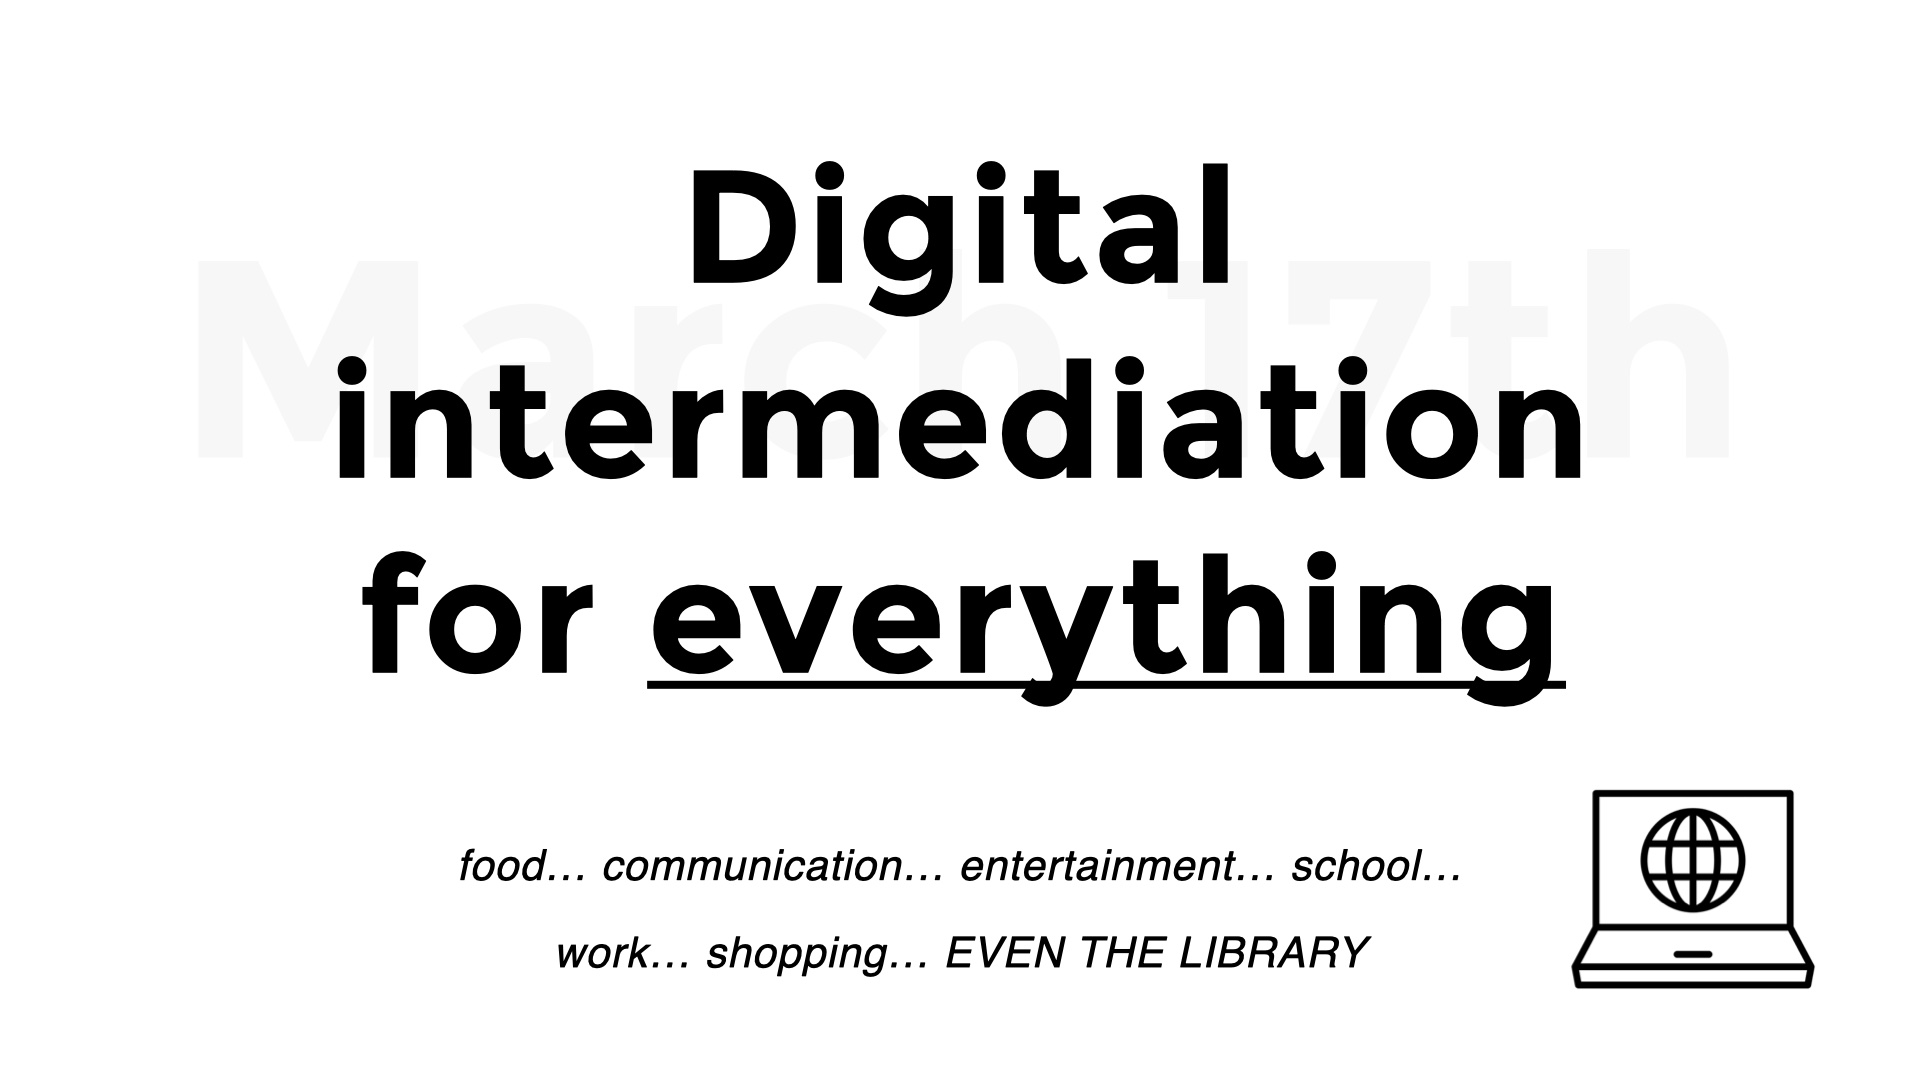 Slide with large text: Digital intermediation
for everything. Smaller text: food… communication… entertainment… school… work… shopping… EVEN THE LIBRARY